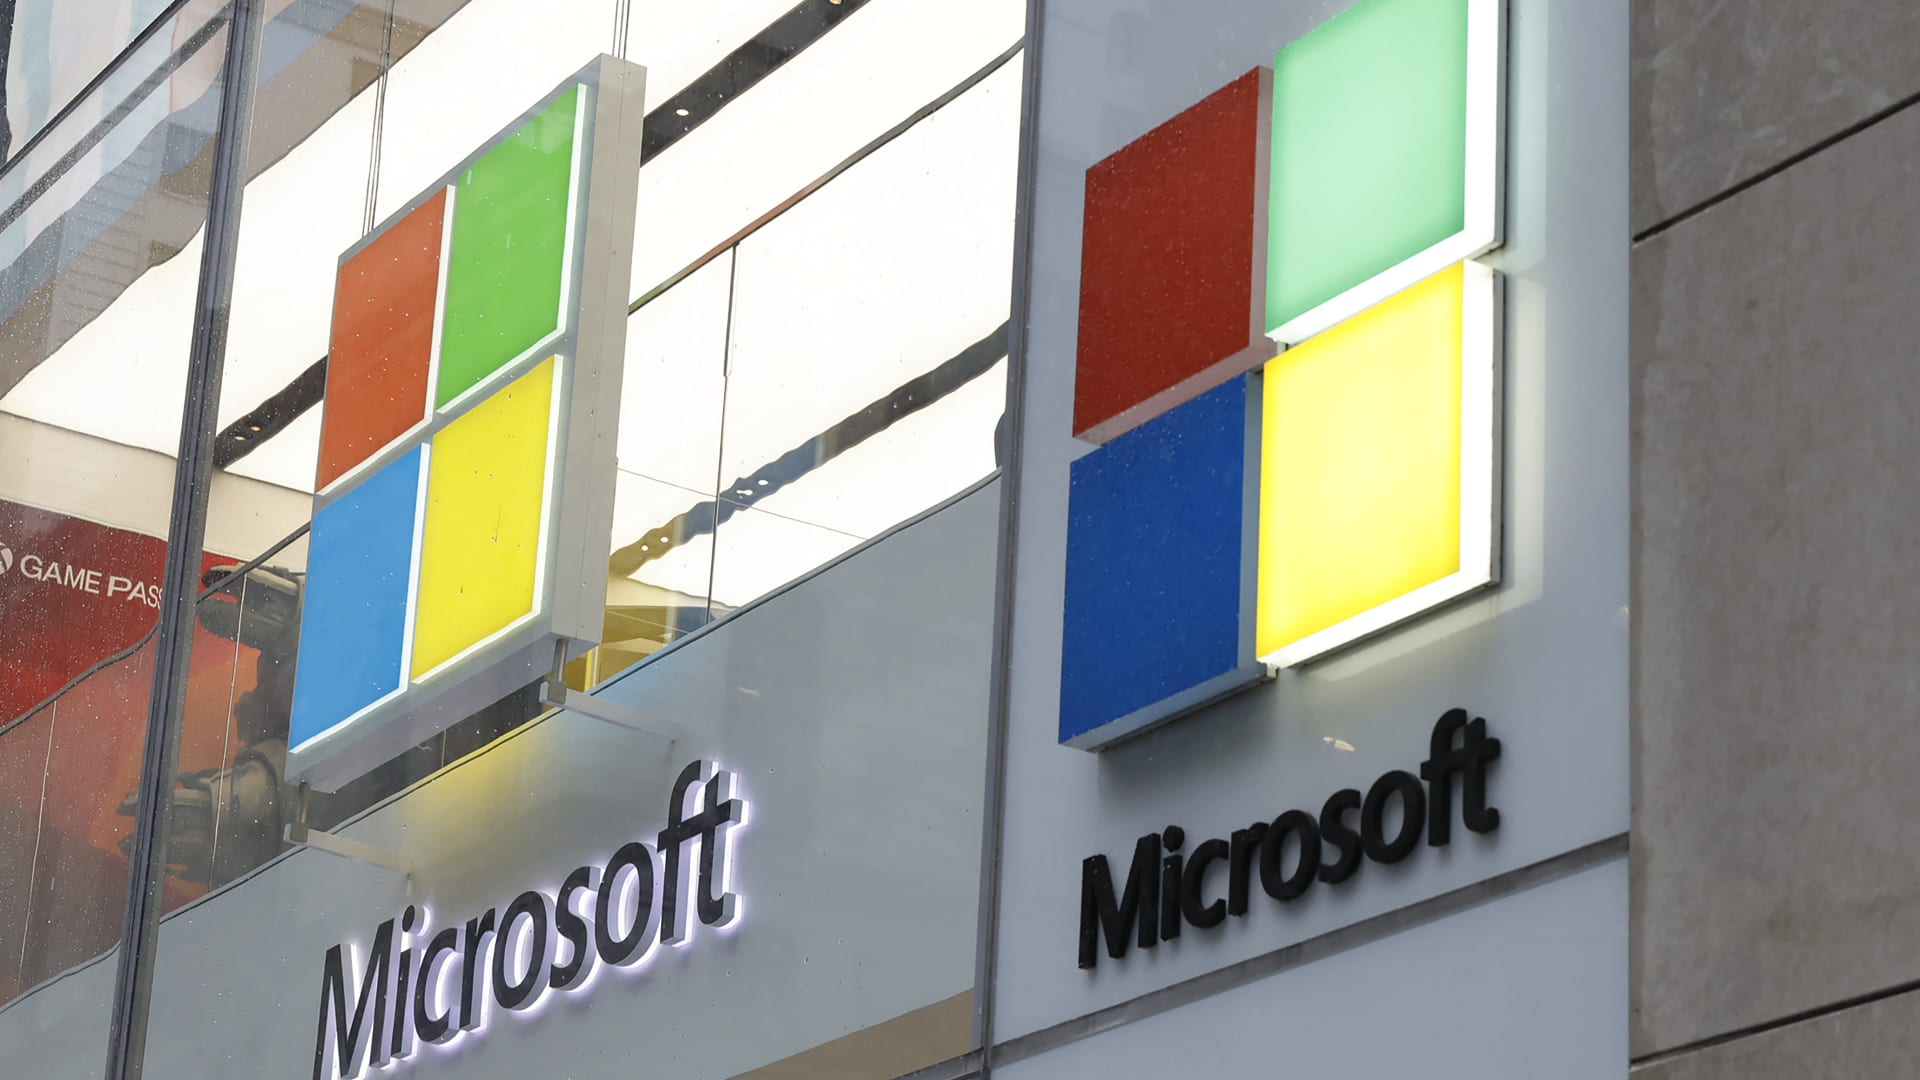 Microsoft's bullish PC outlook makes us want to buy more of this electronics retailer